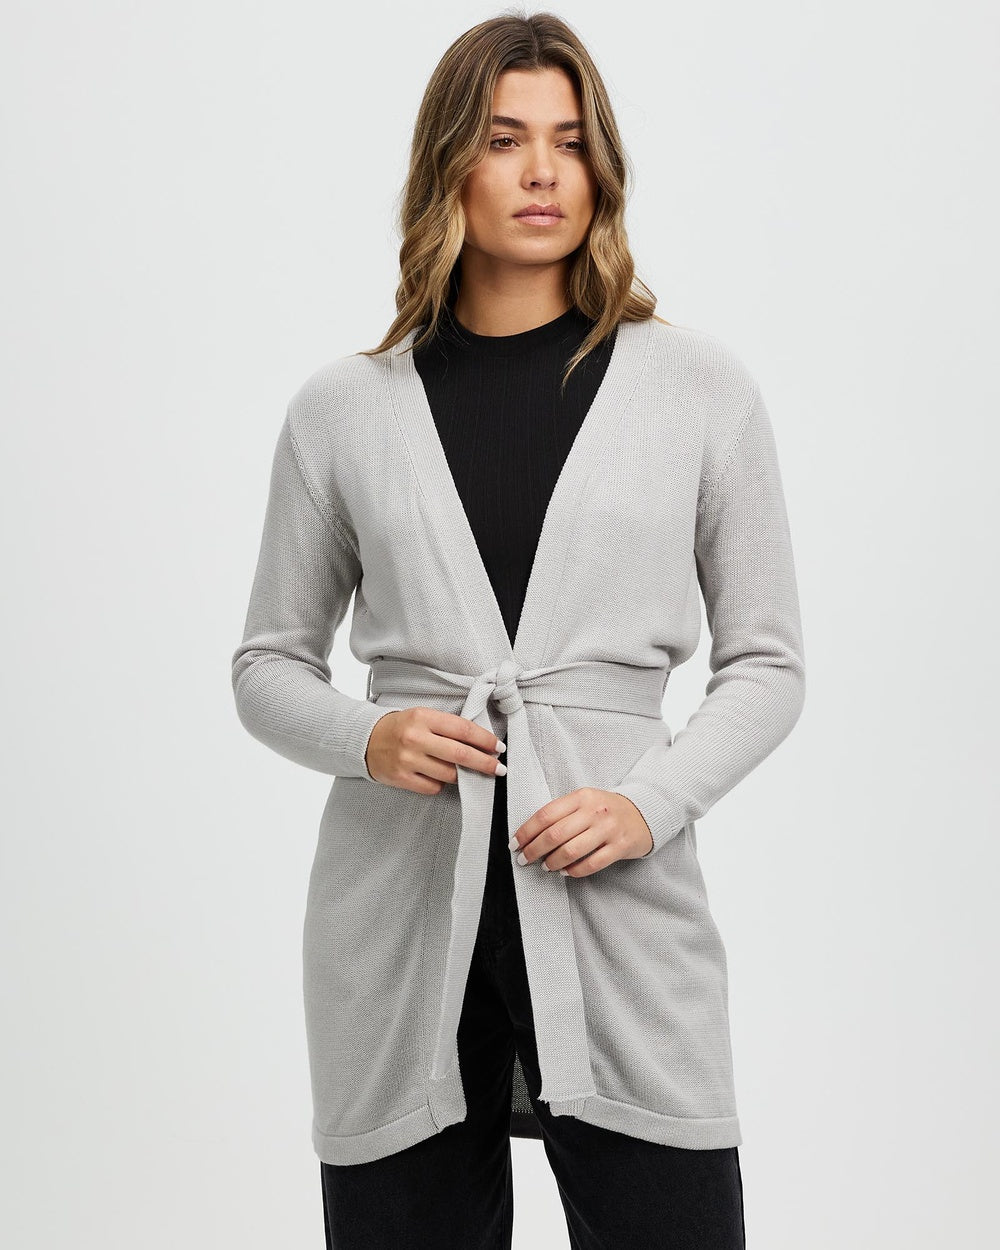 Belted cotton cardigan to pair with t shirt and jeans